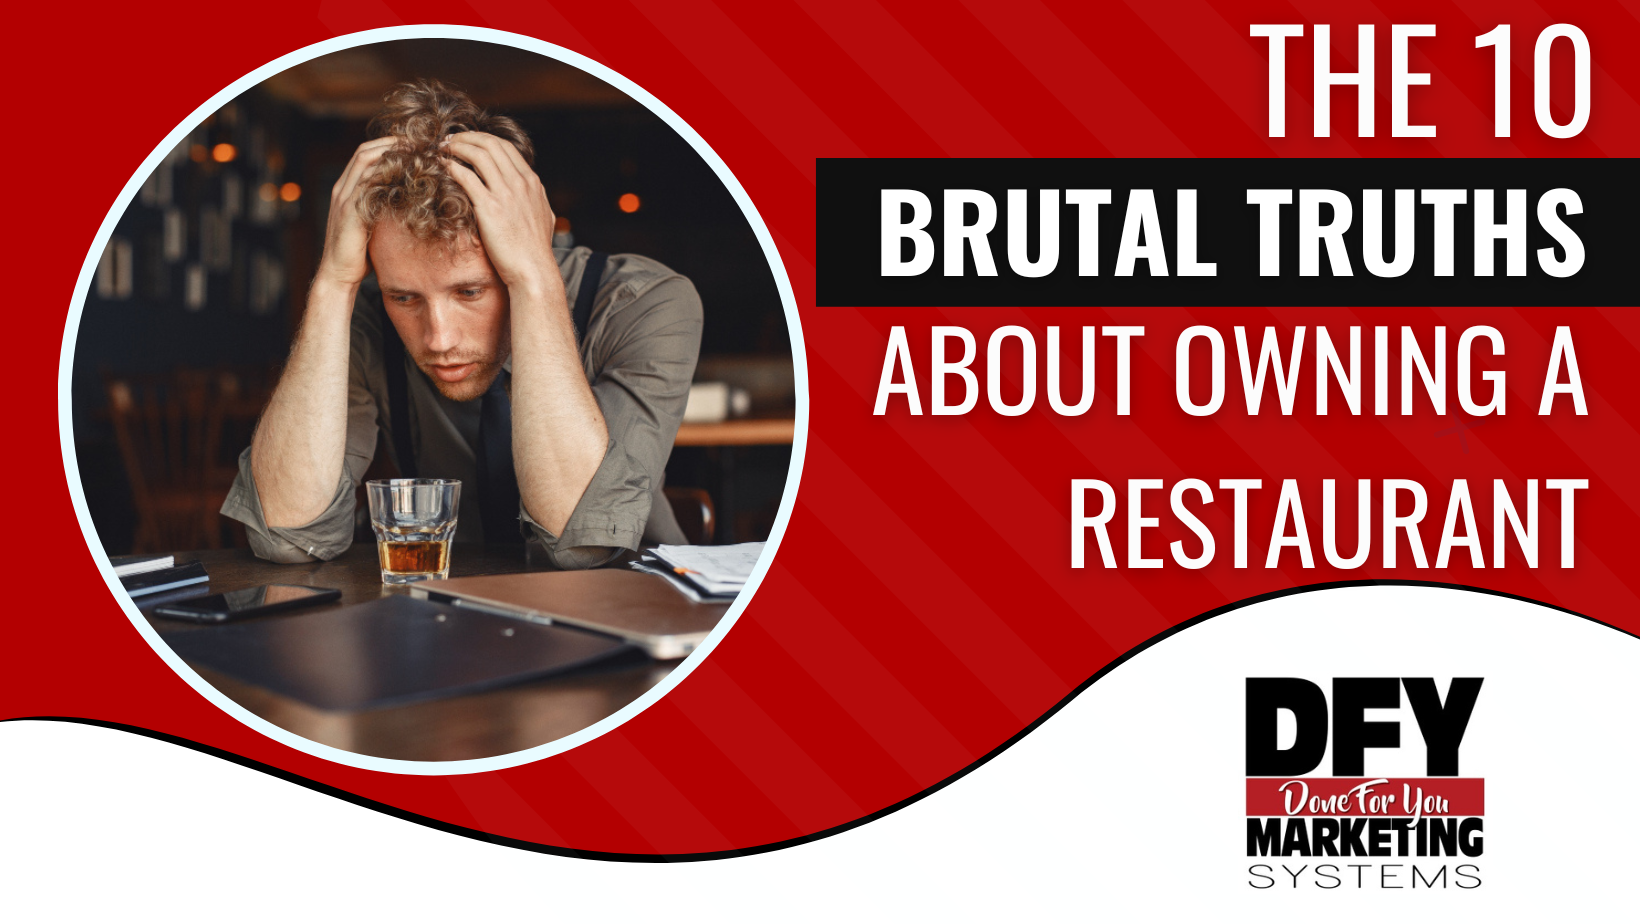 The 10 Brutal Truths About Owning A Restaurant